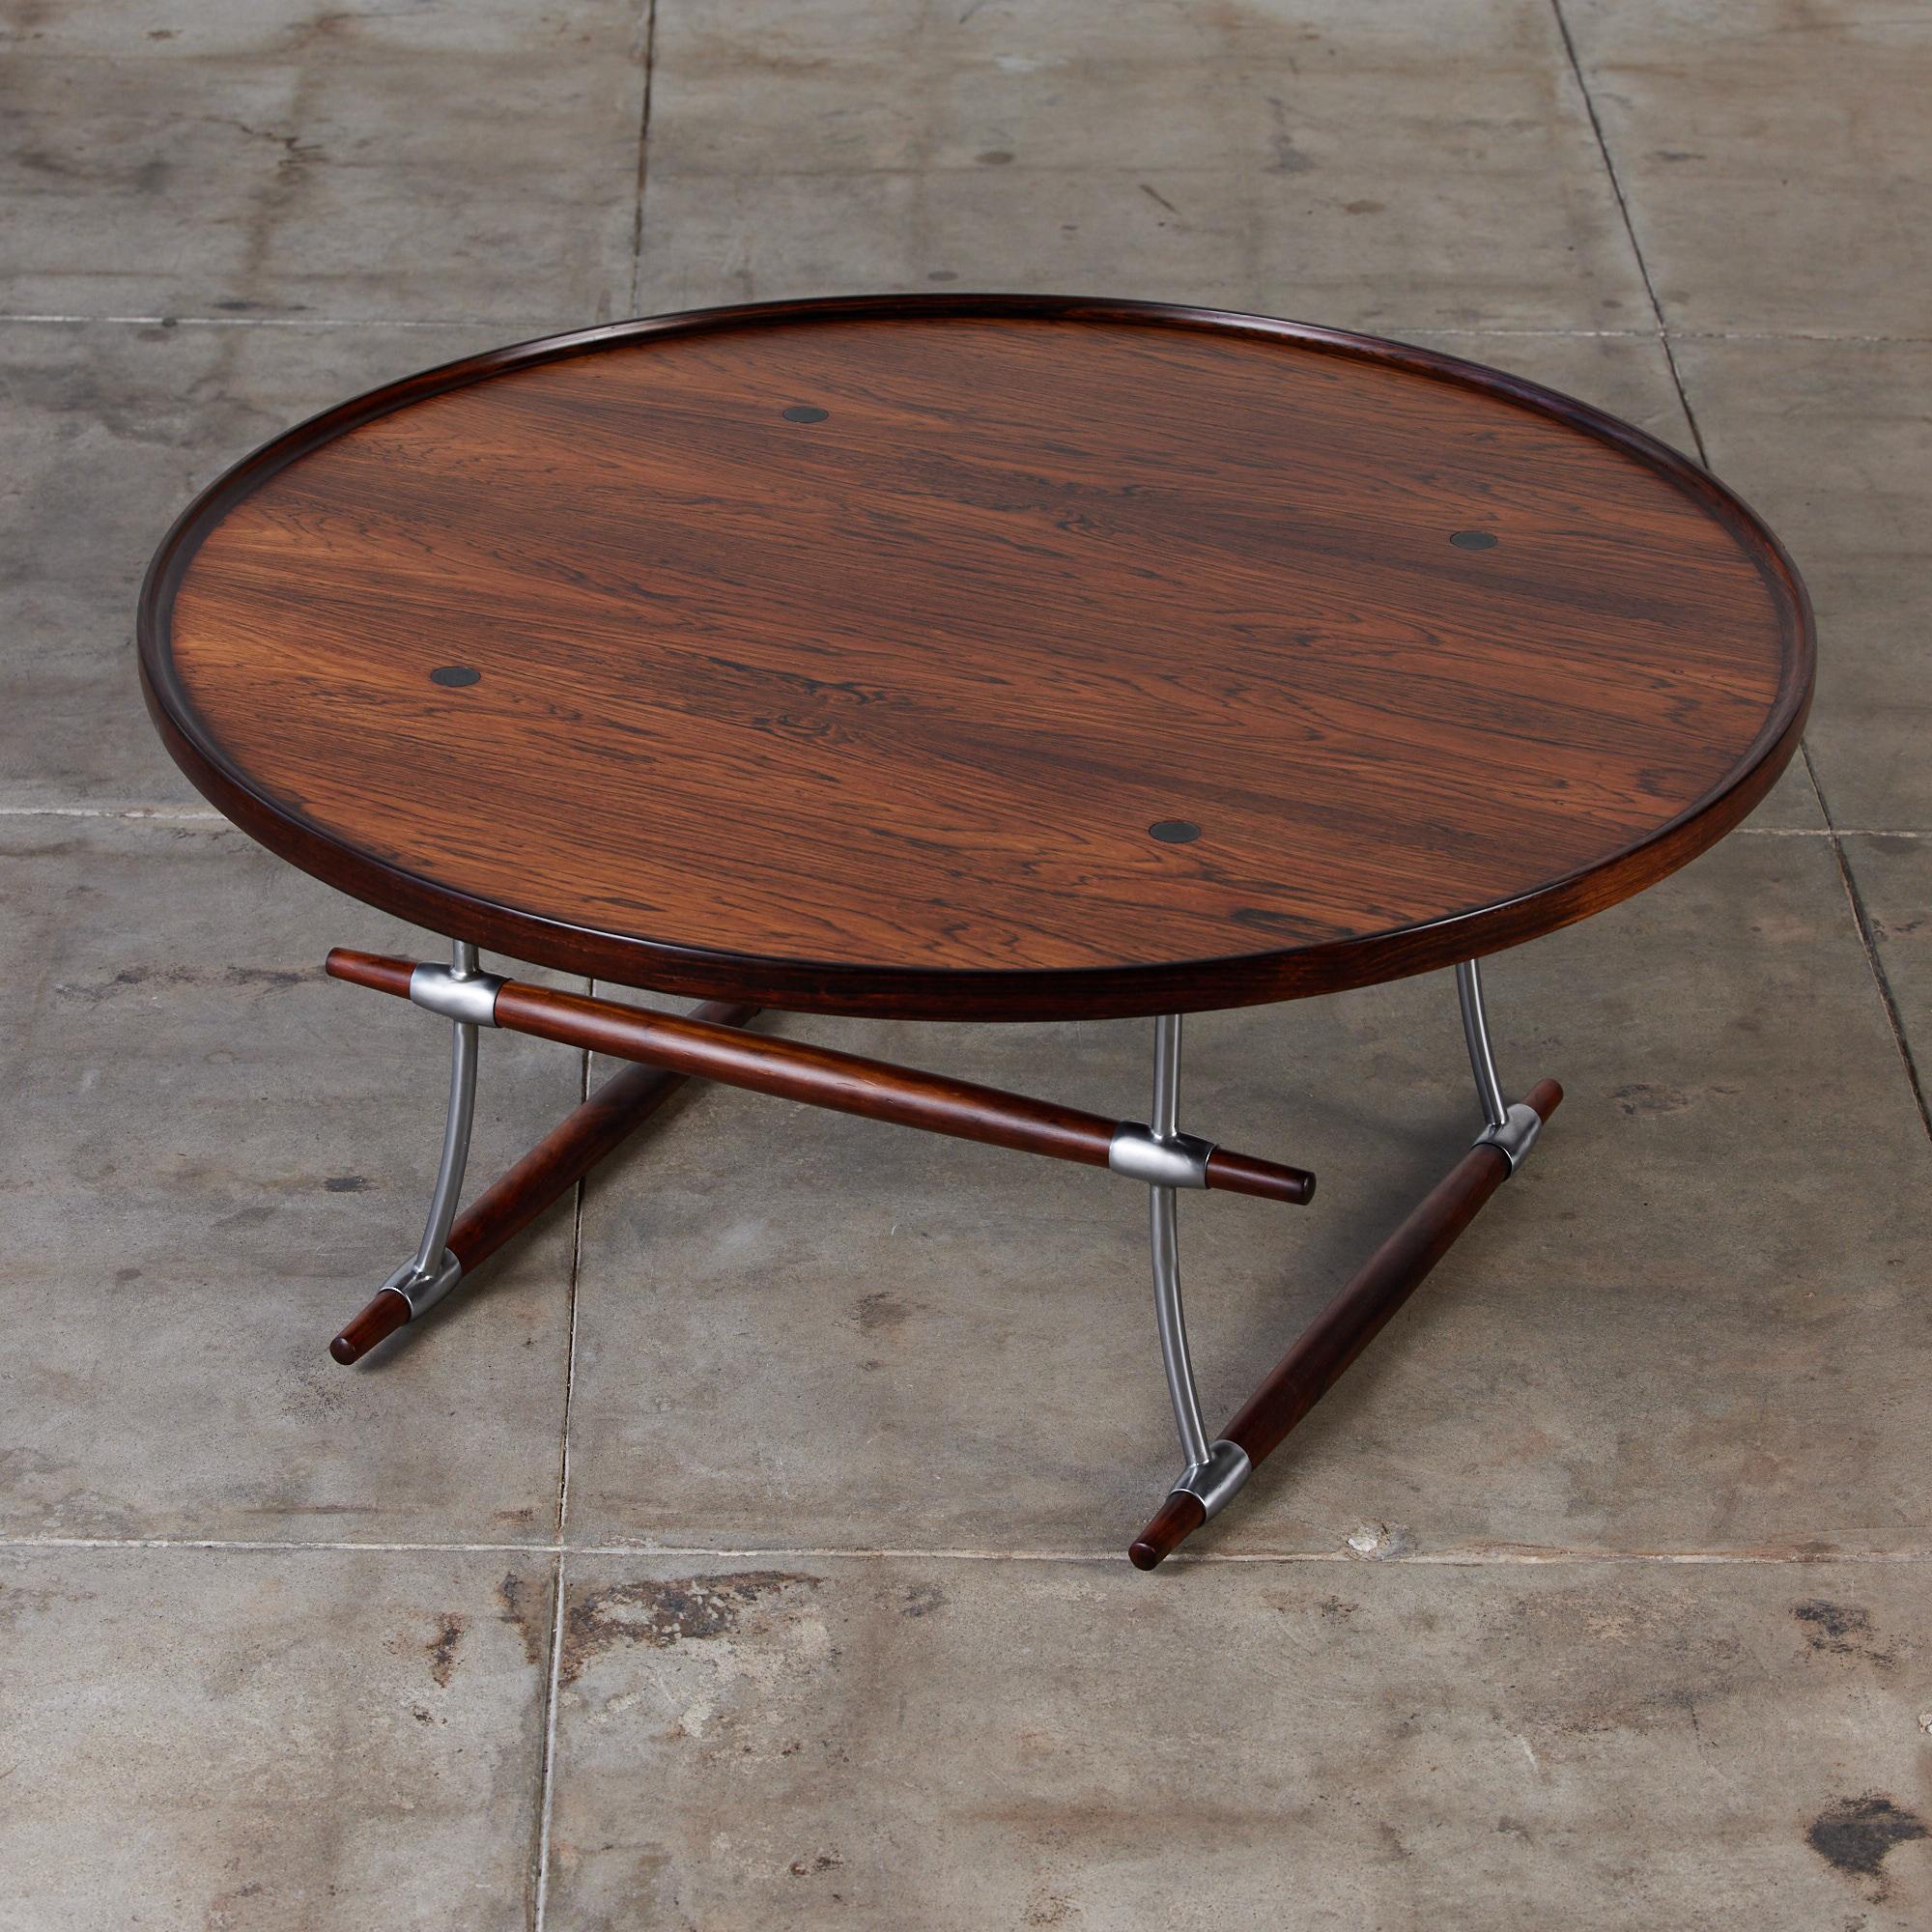 Oiled Jens H. Quistgaard Rosewood Coffee Table